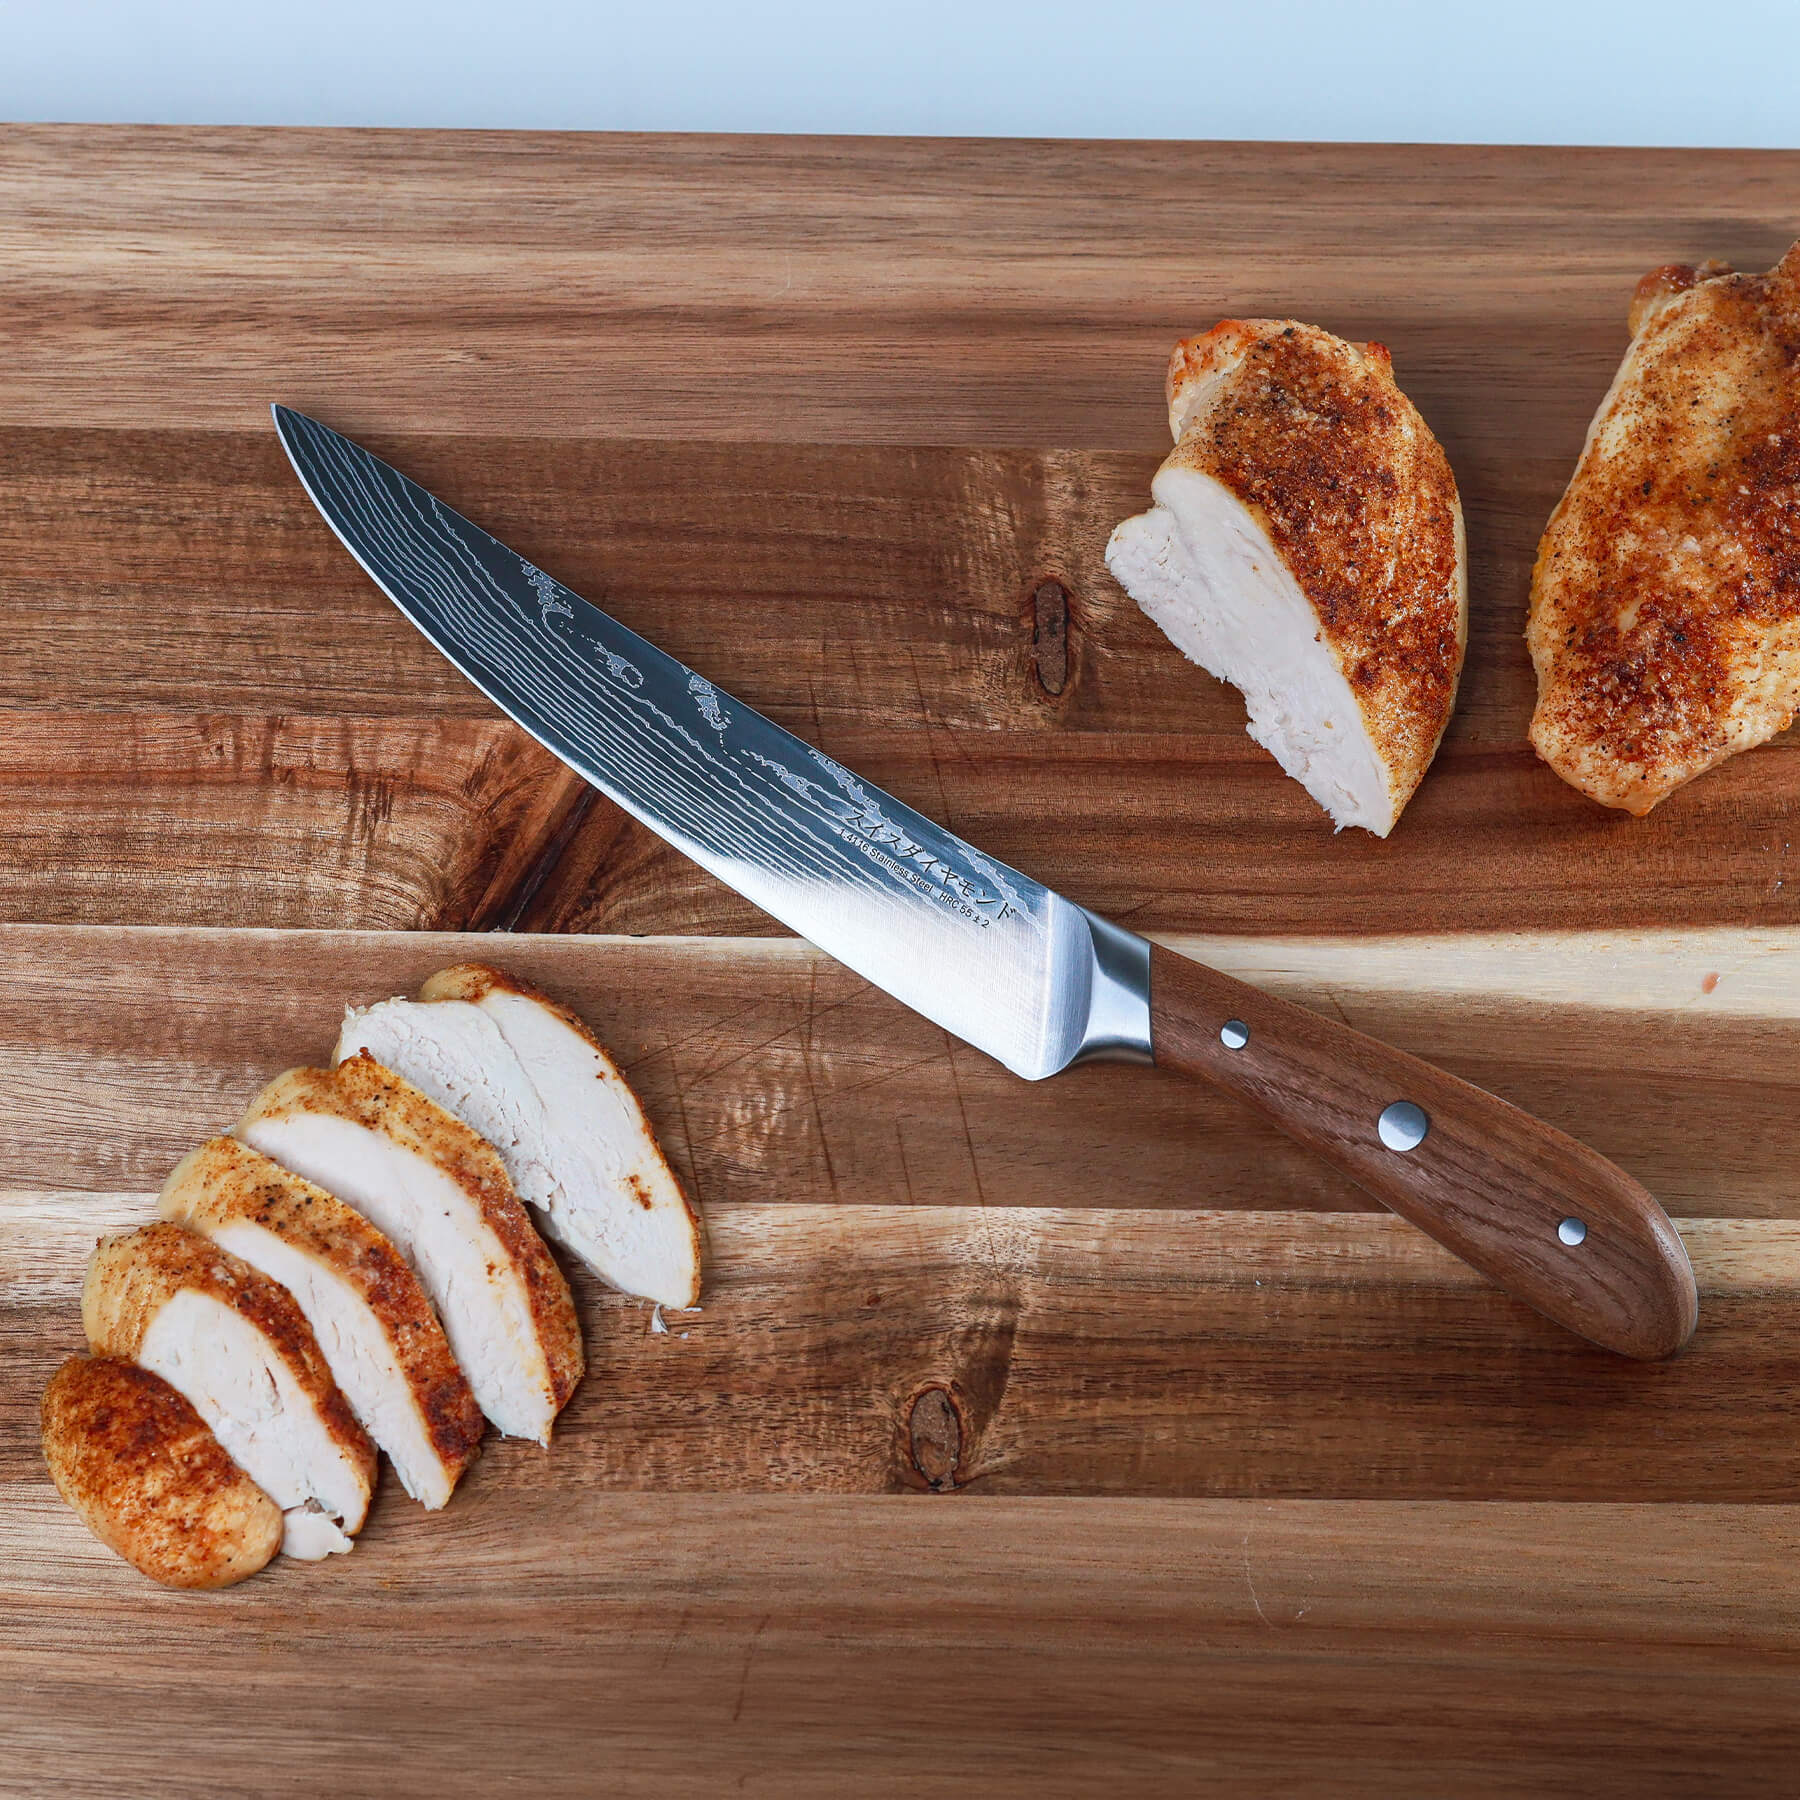 8" Damascus Carving Knife on cutting board with sliced chicken